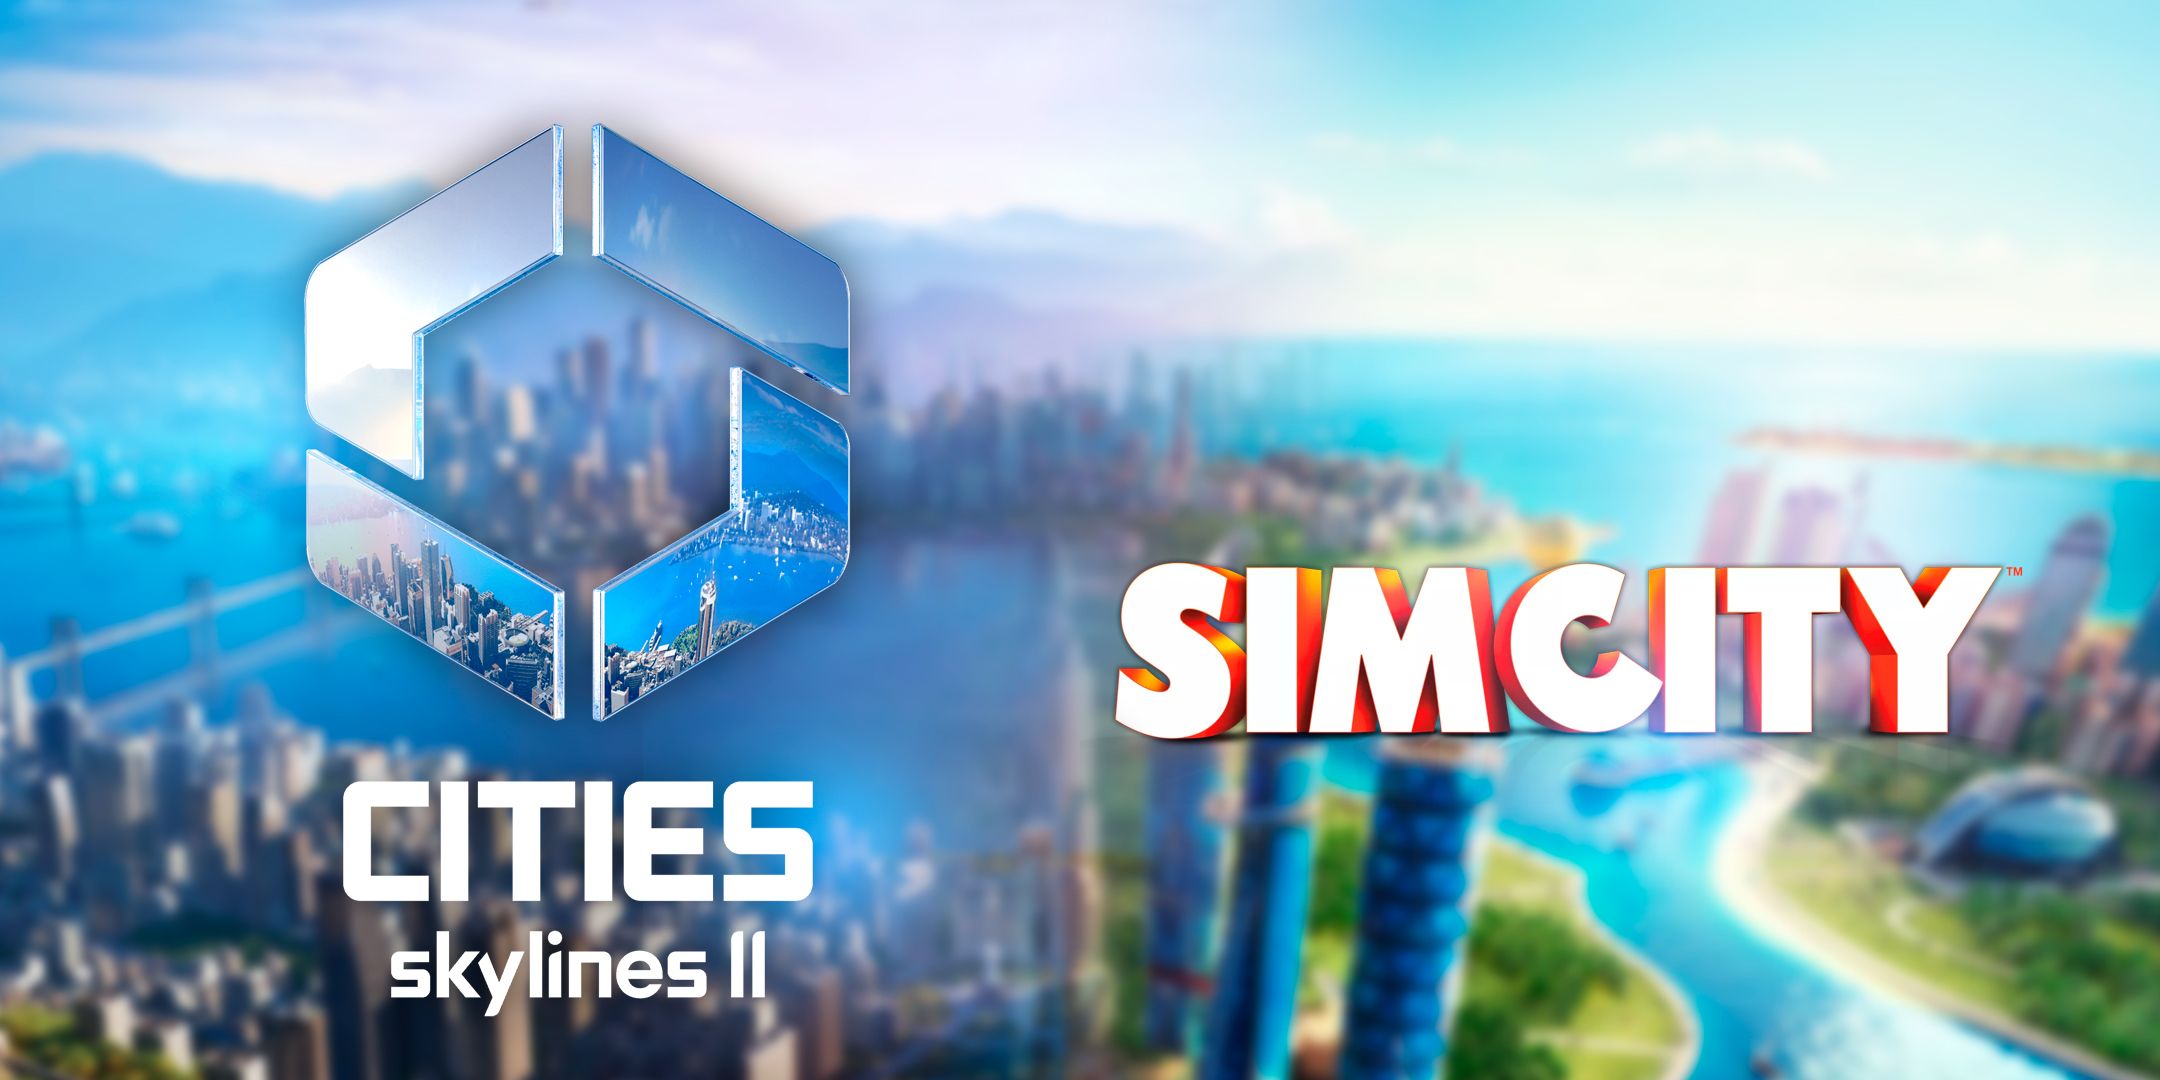 cities-skylines-2-simcity-wrong-lessons-technical-issues